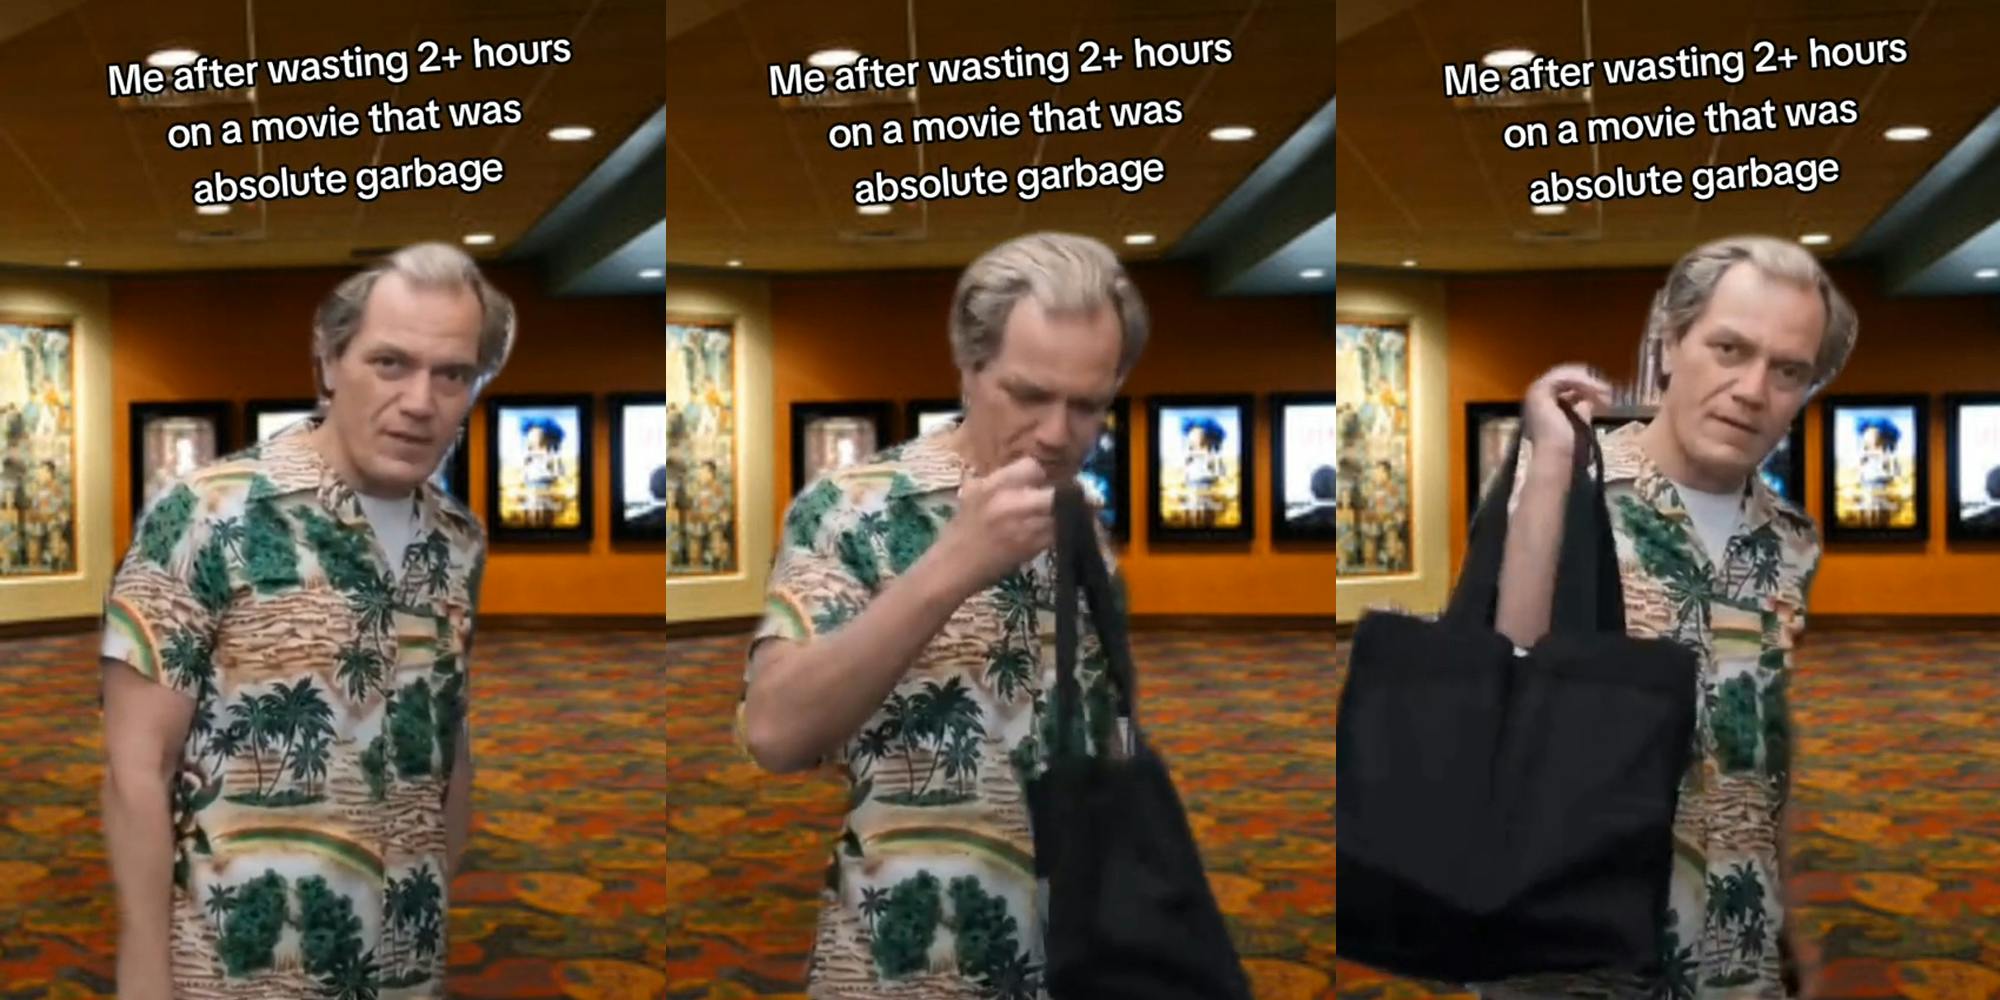 Michael Shannon greenscreen TikTok meme over movie theater background with caption "Me after wasting 2+ hours on a movie that was absolutely garbage" (l) Michael Shannon greenscreen TikTok meme over movie theater background with caption "Me after wasting 2+ hours on a movie that was absolutely garbage" (c) Michael Shannon greenscreen TikTok meme over movie theater background with caption "Me after wasting 2+ hours on a movie that was absolutely garbage" (r)